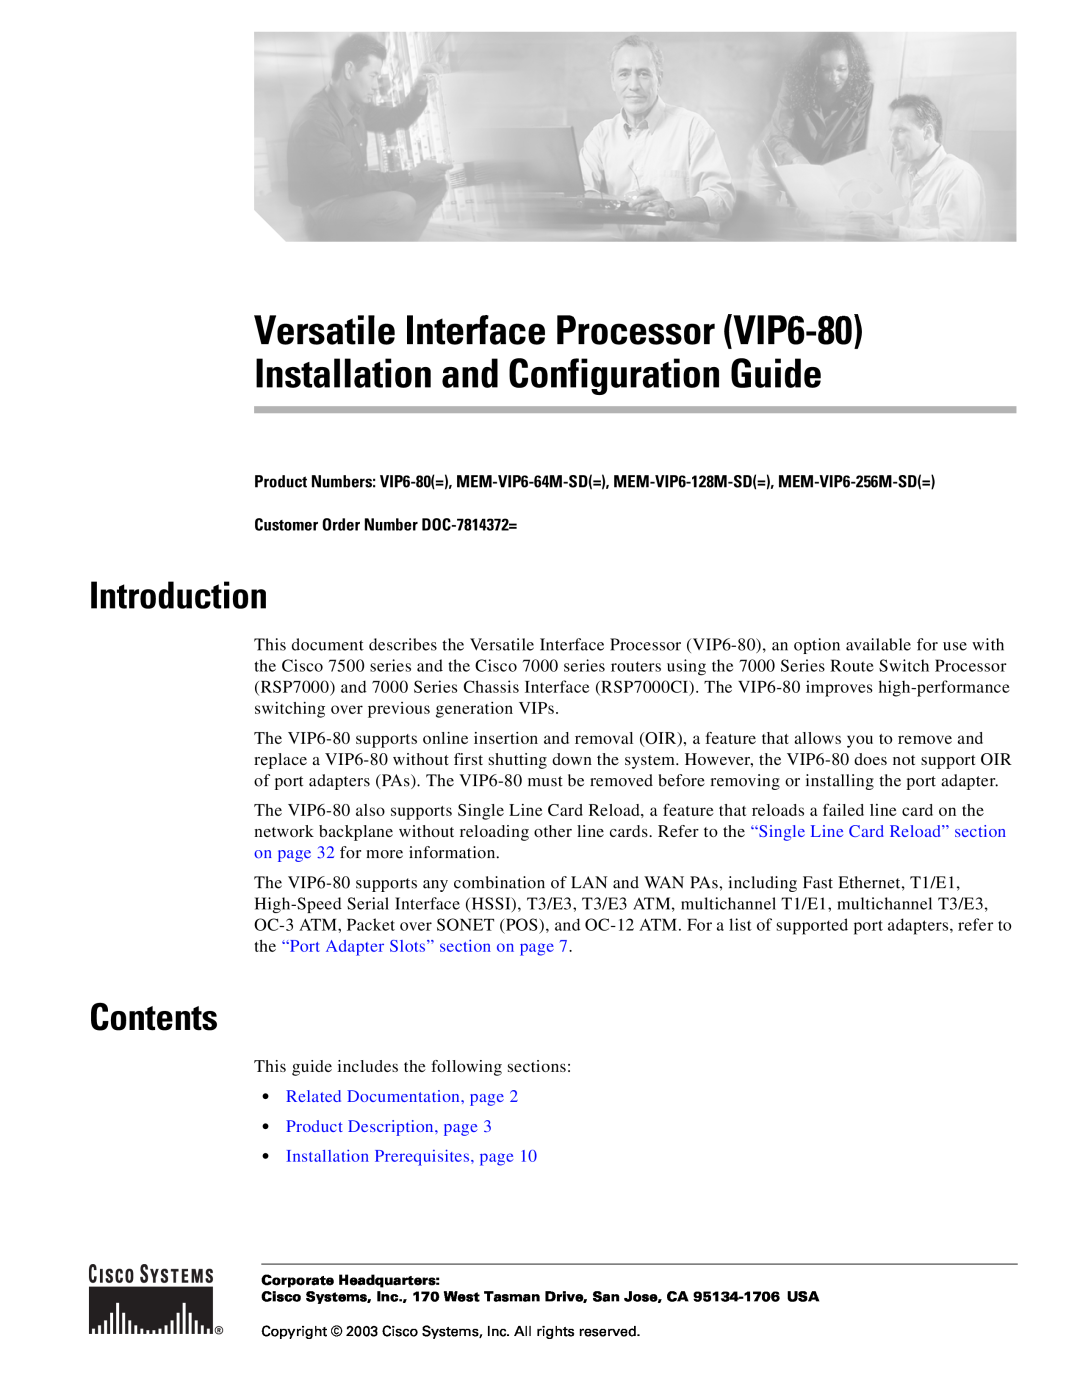 Cisco Systems (VIP6-80) manual Introduction, Contents, Customer Order Number DOC-7814372= 